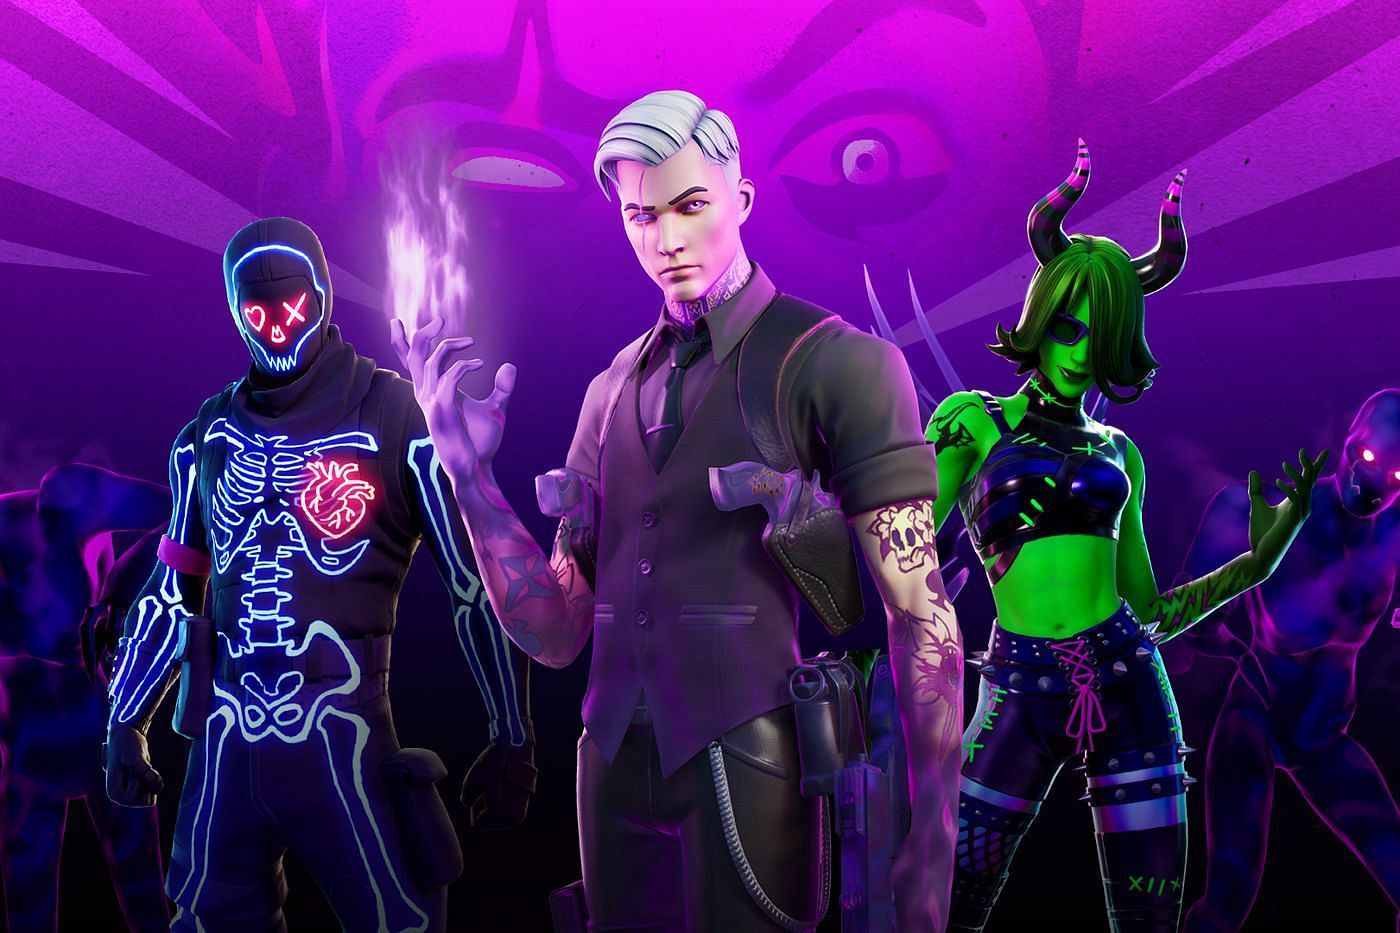 Top 10 Fortnitemares Outfits, ranked